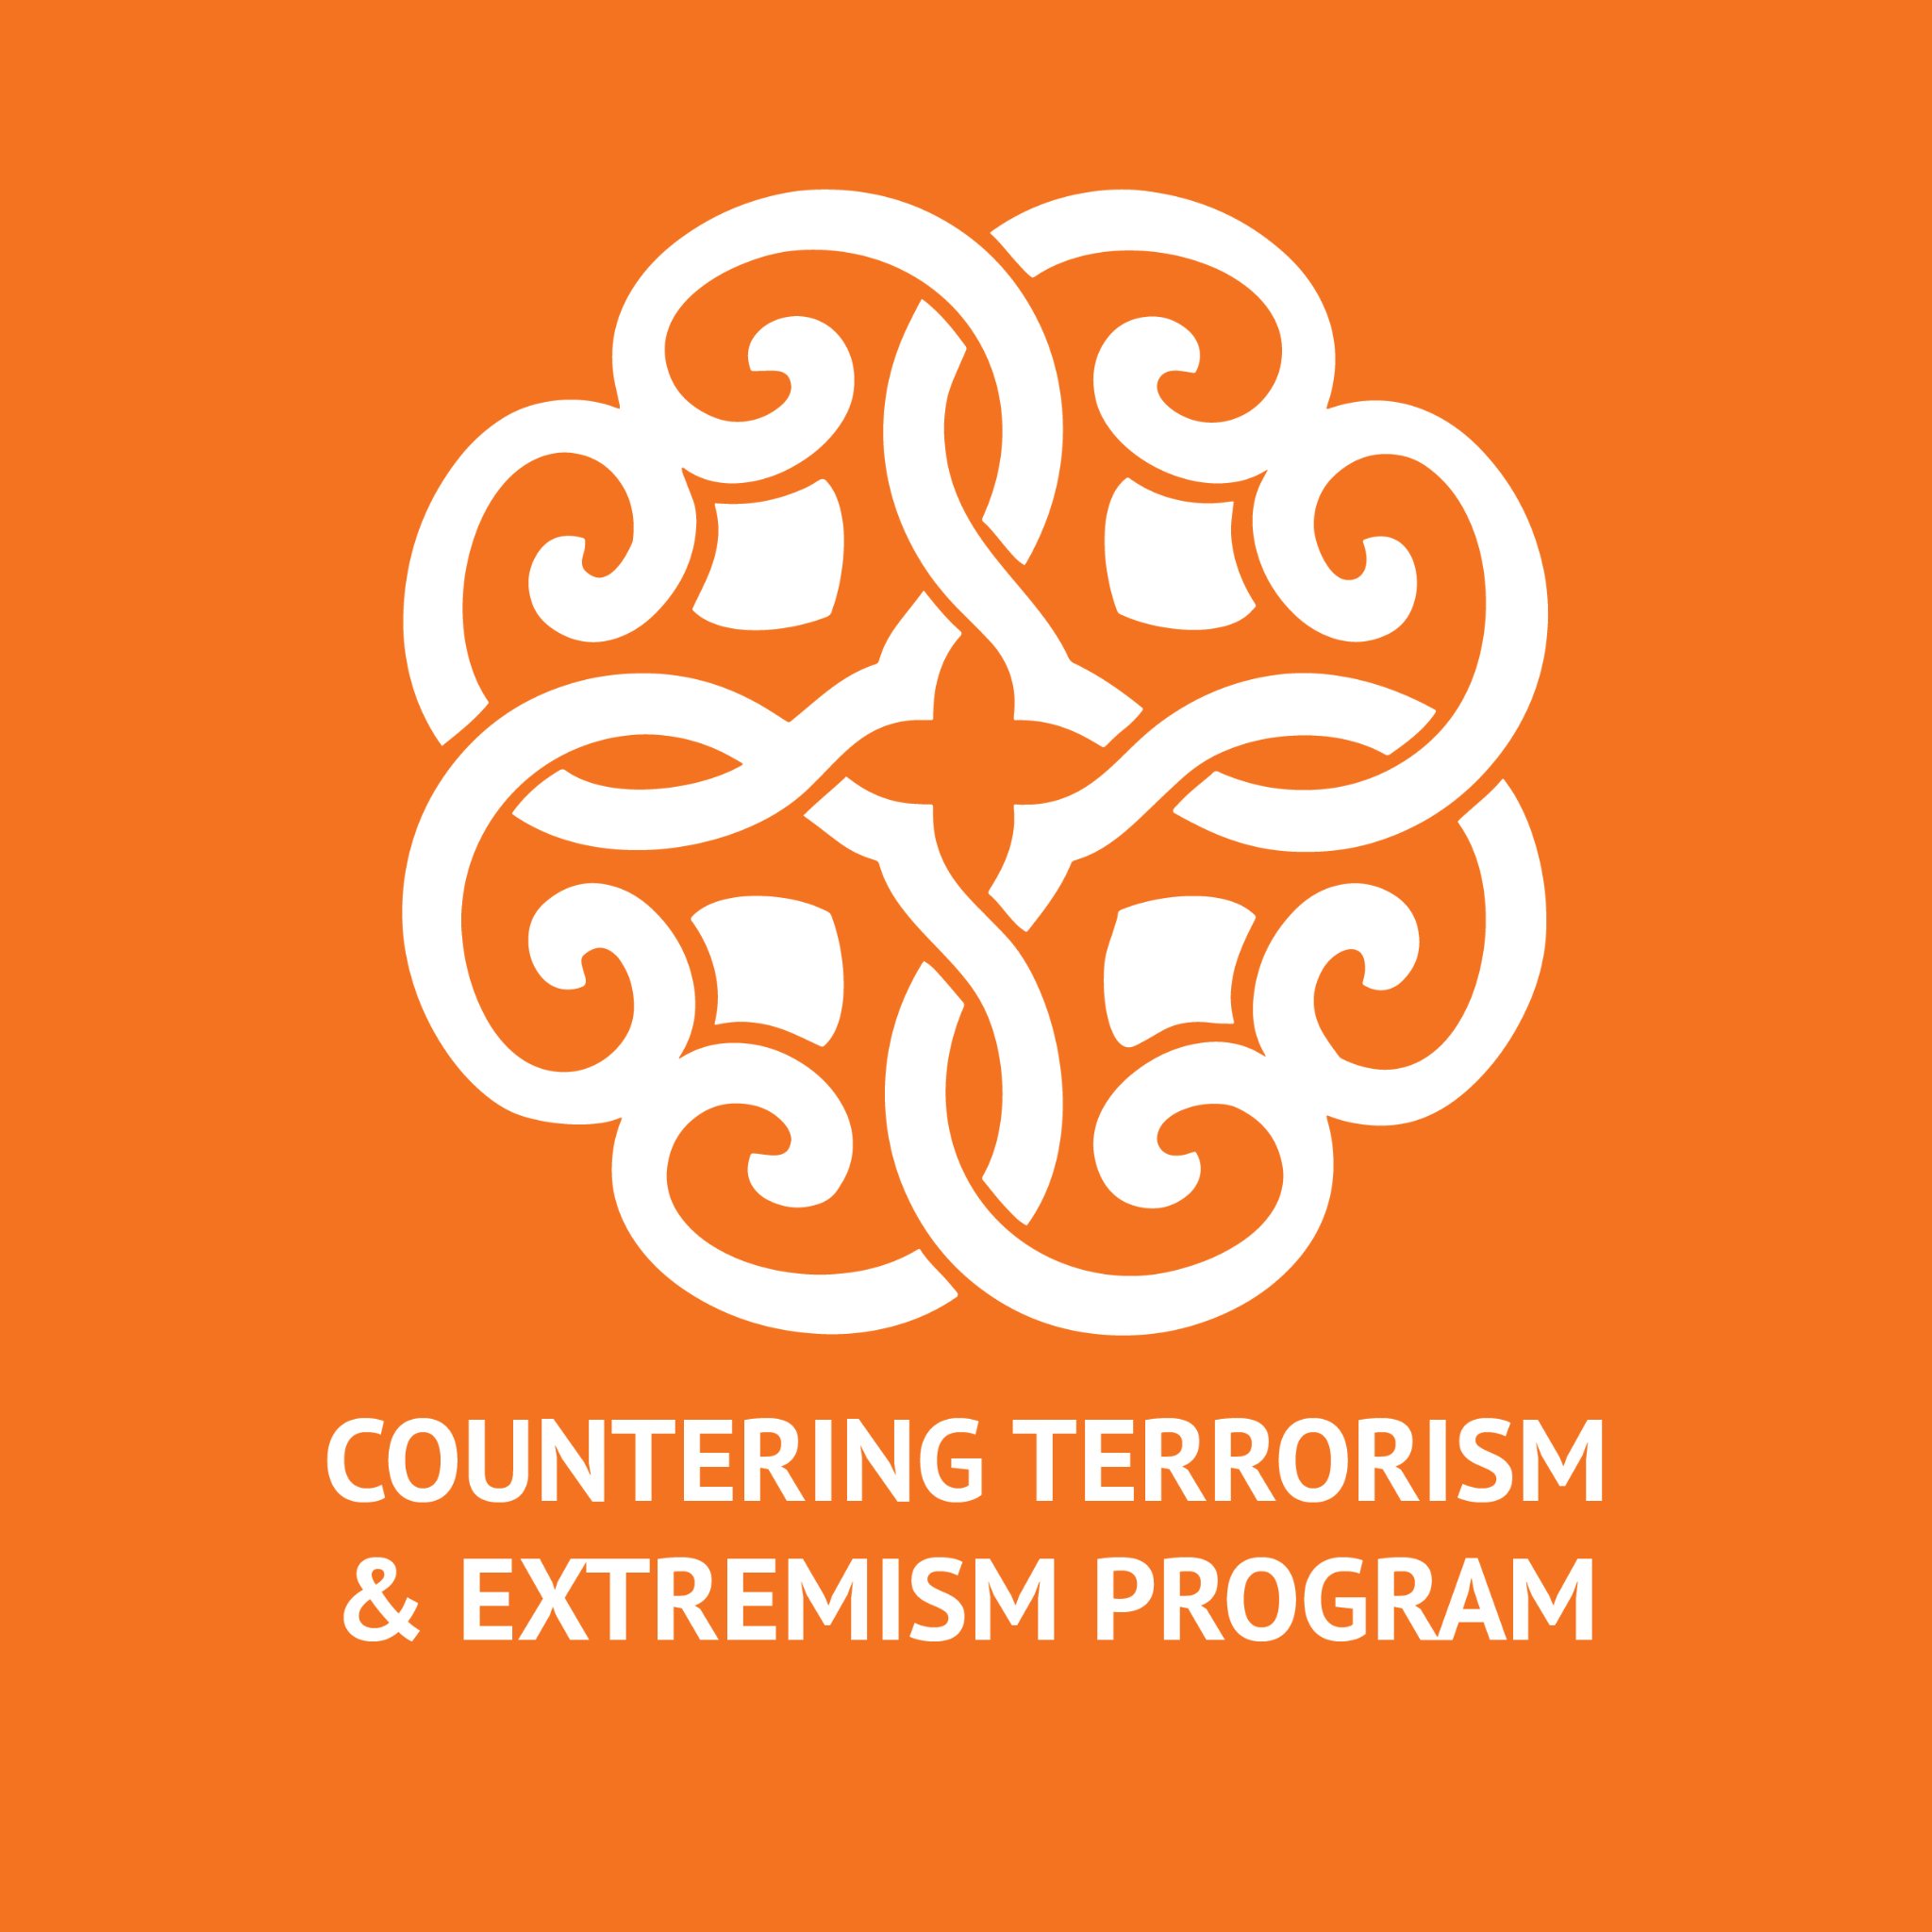 Updates & content from the @MiddleEastInst's Countering Terrorism & Extremism program.

Director: @Charles_Lister.